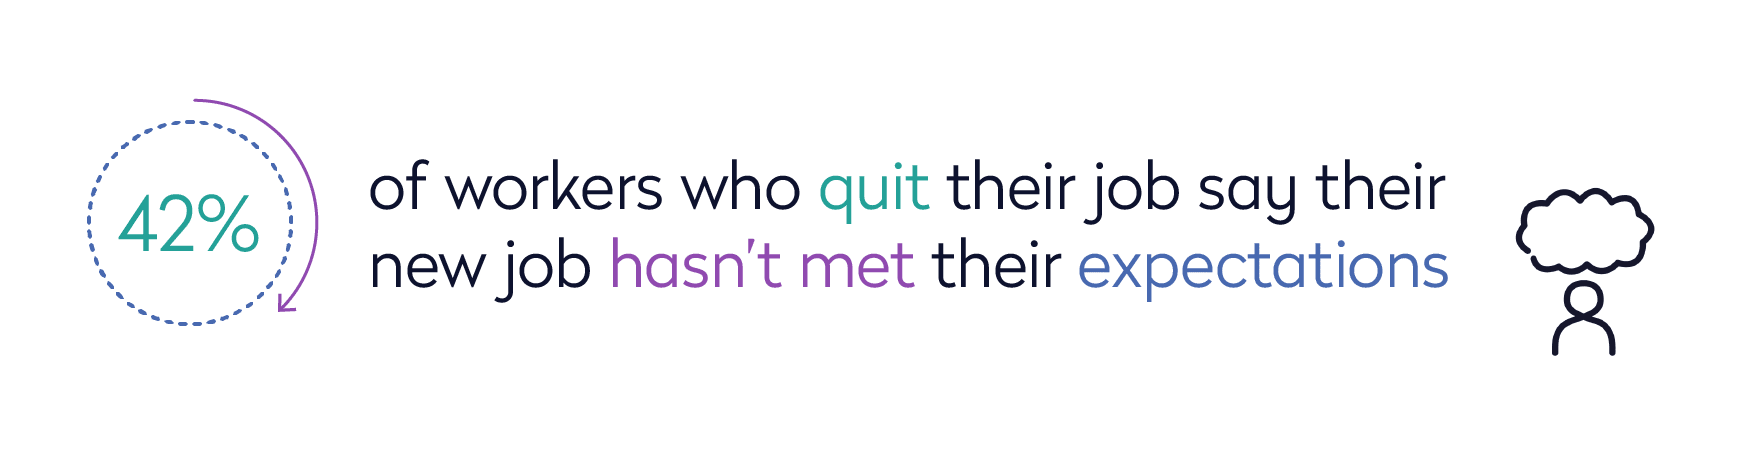 42% of workers who quit their job say their new job hasn’t met their expectations.